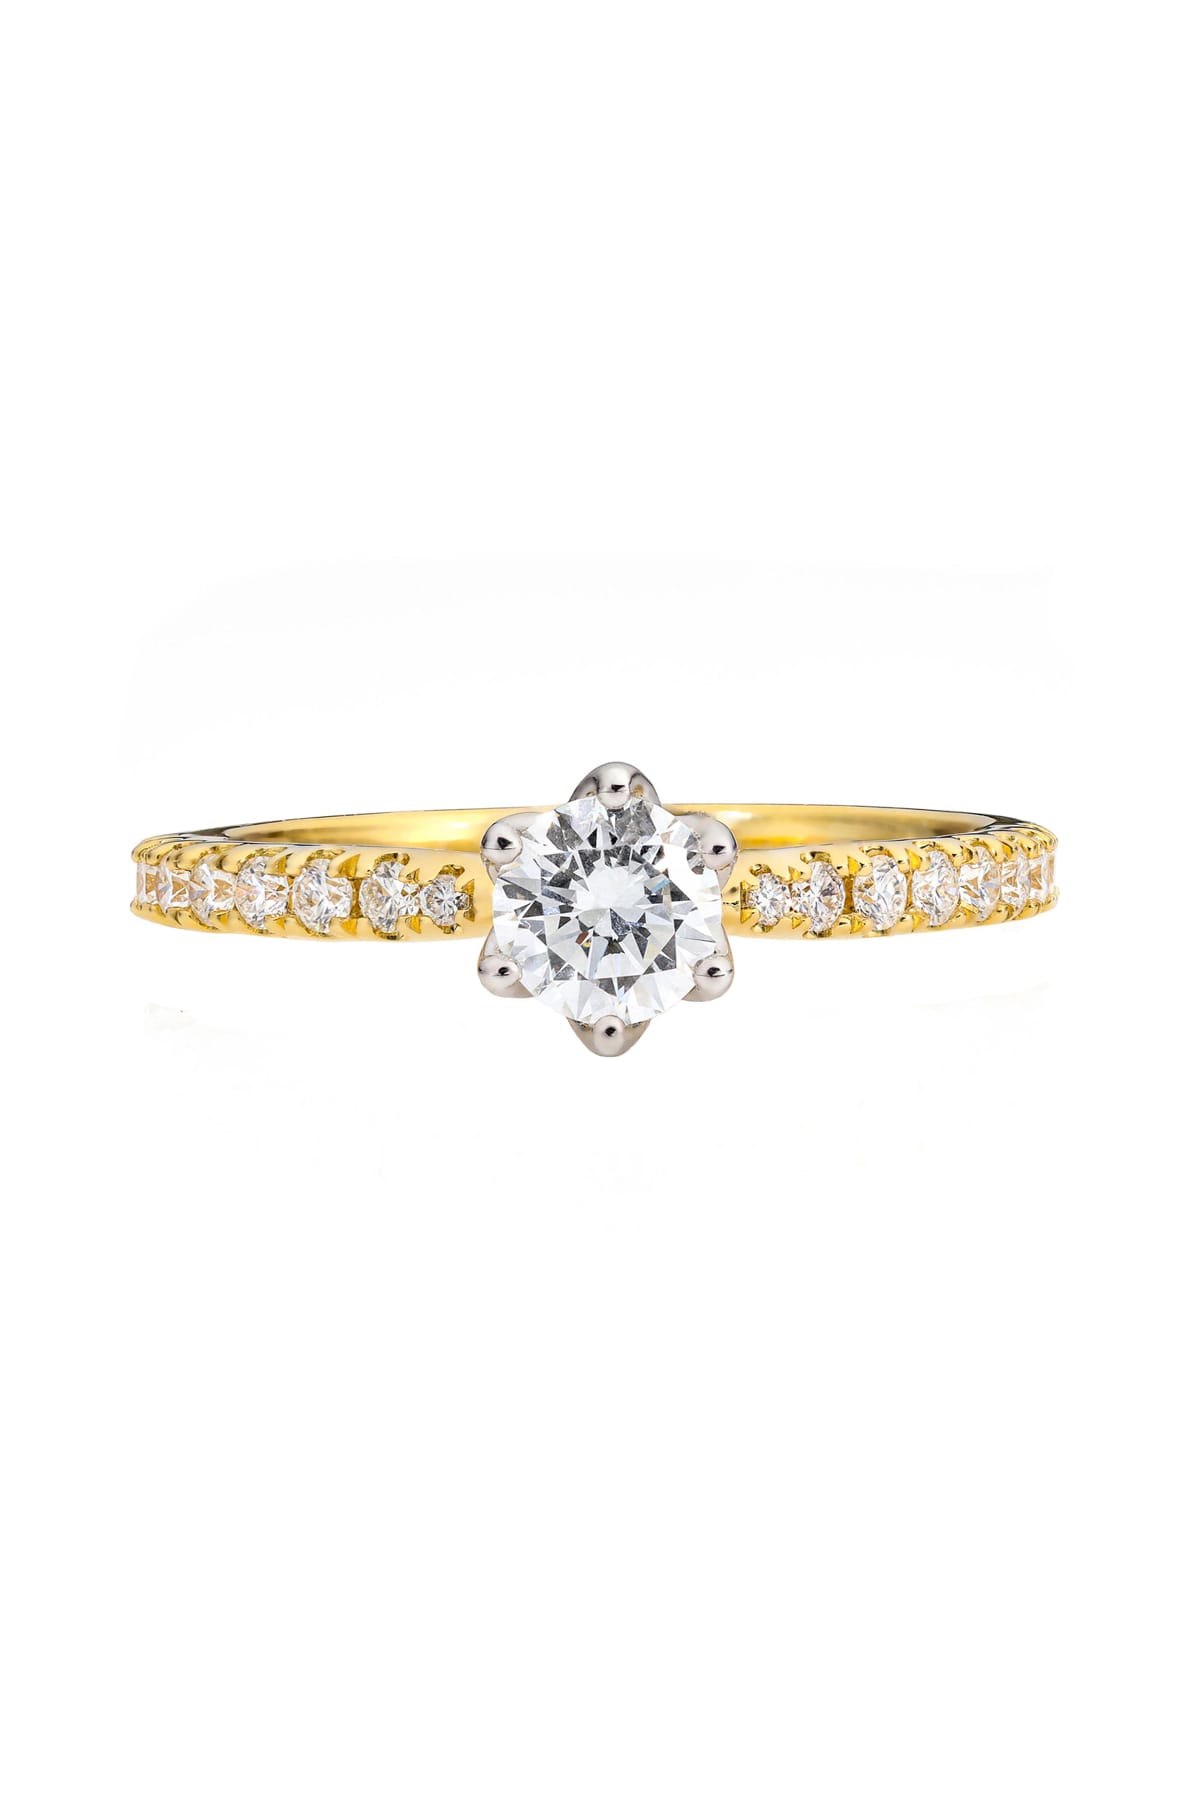 18 Carat Gold With 0.51 Carat Round Diamond Engagement Ring And Diamond Band available at LeGassick Diamonds and Jewellery Gold Coast, Australia.